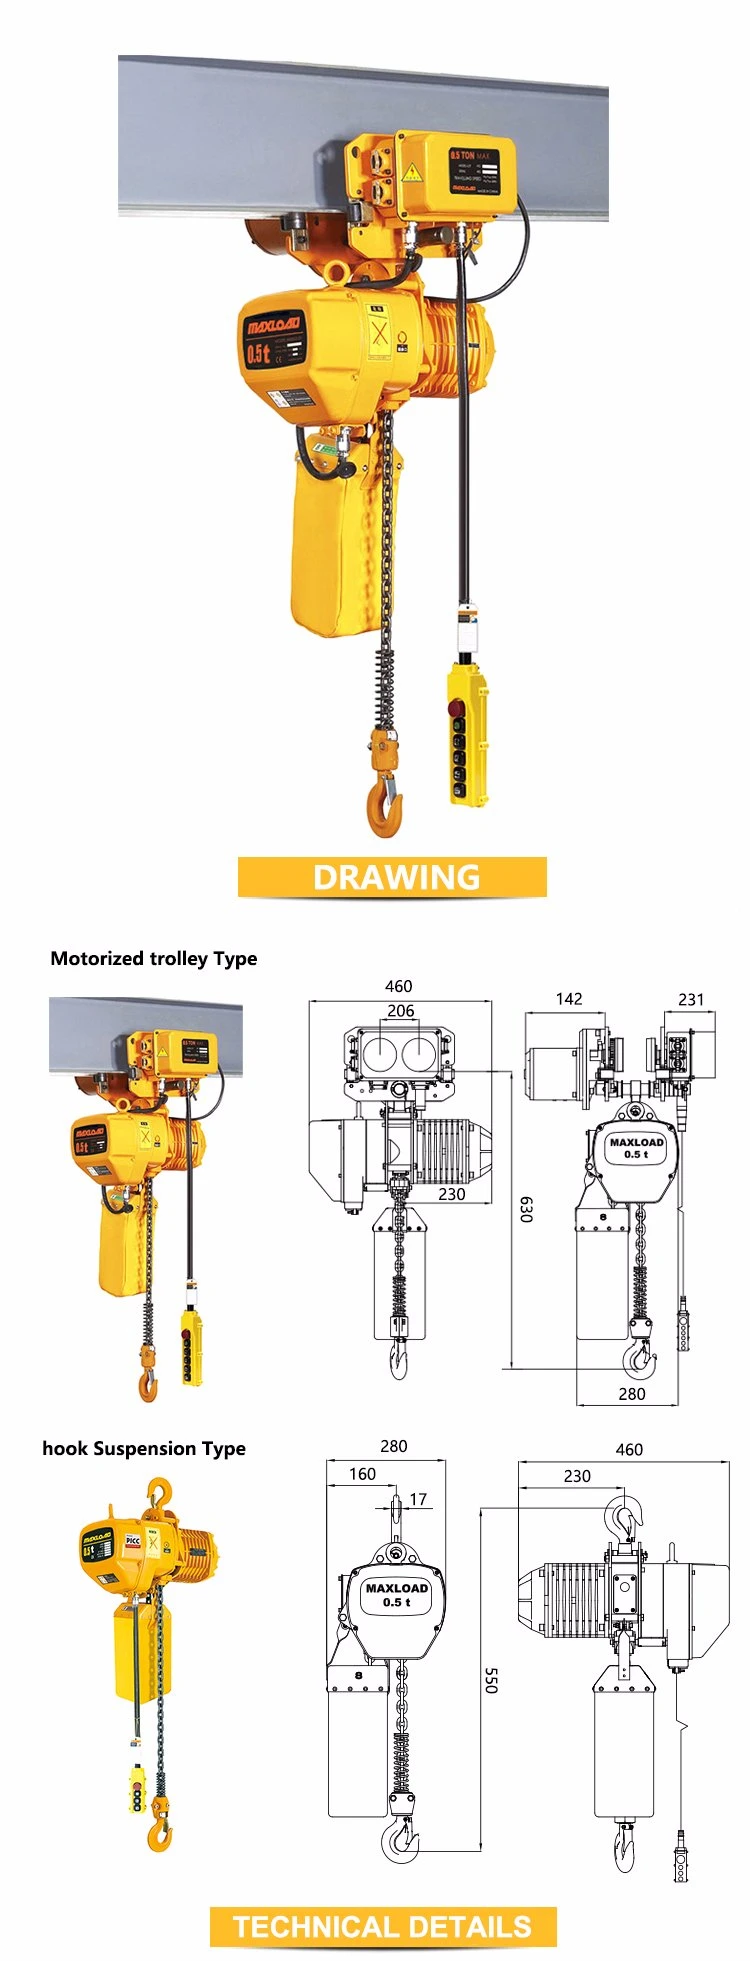 500kg Material Handling Equipment, Lifting Tools and Equipment, Electric Chain Hoist